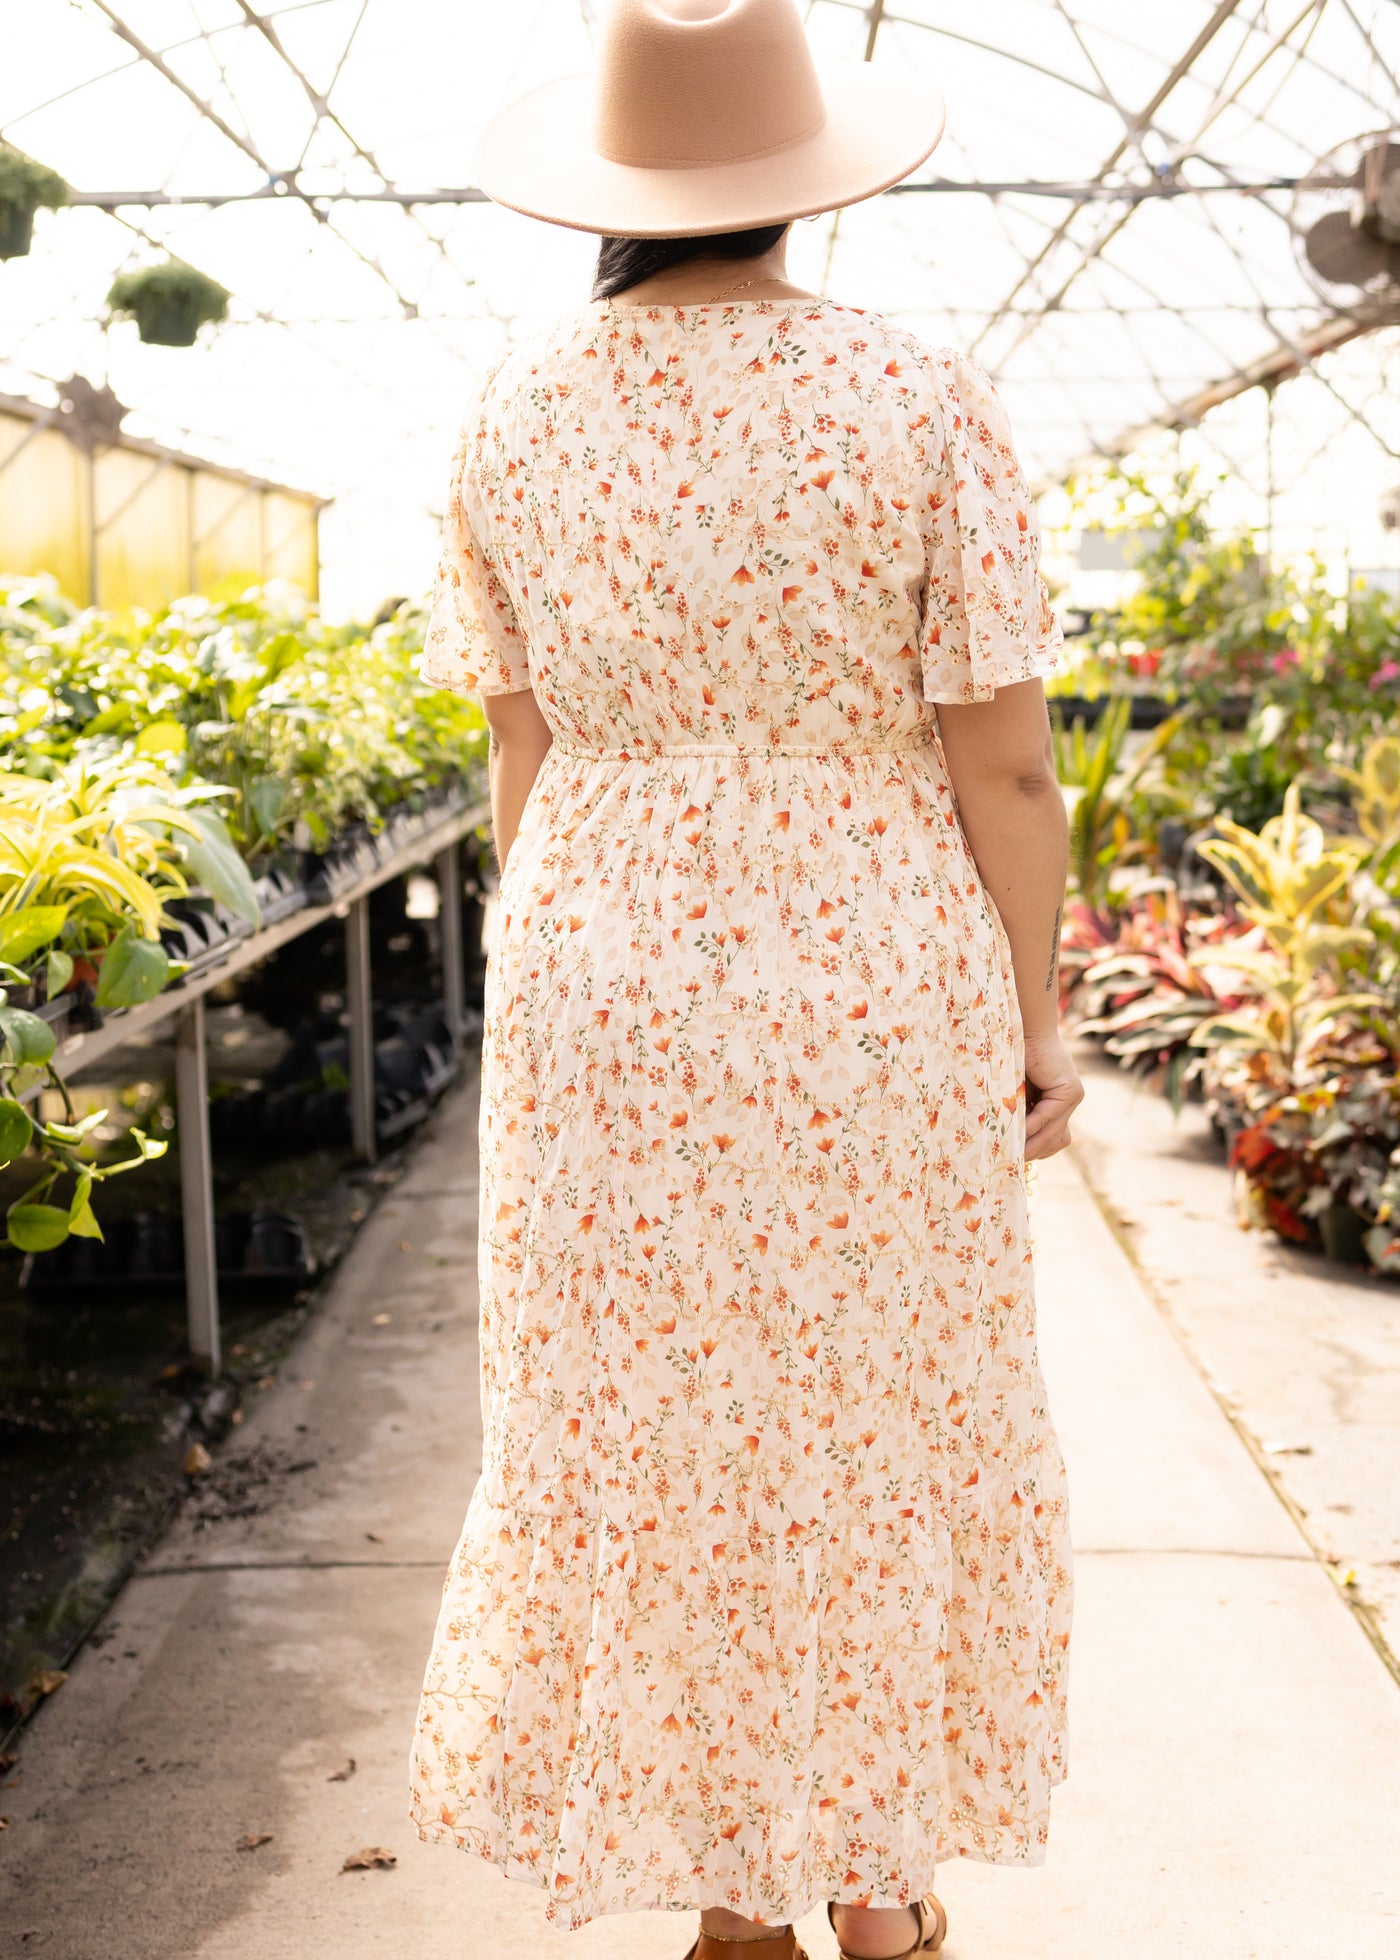 Back view of a cream floral dress